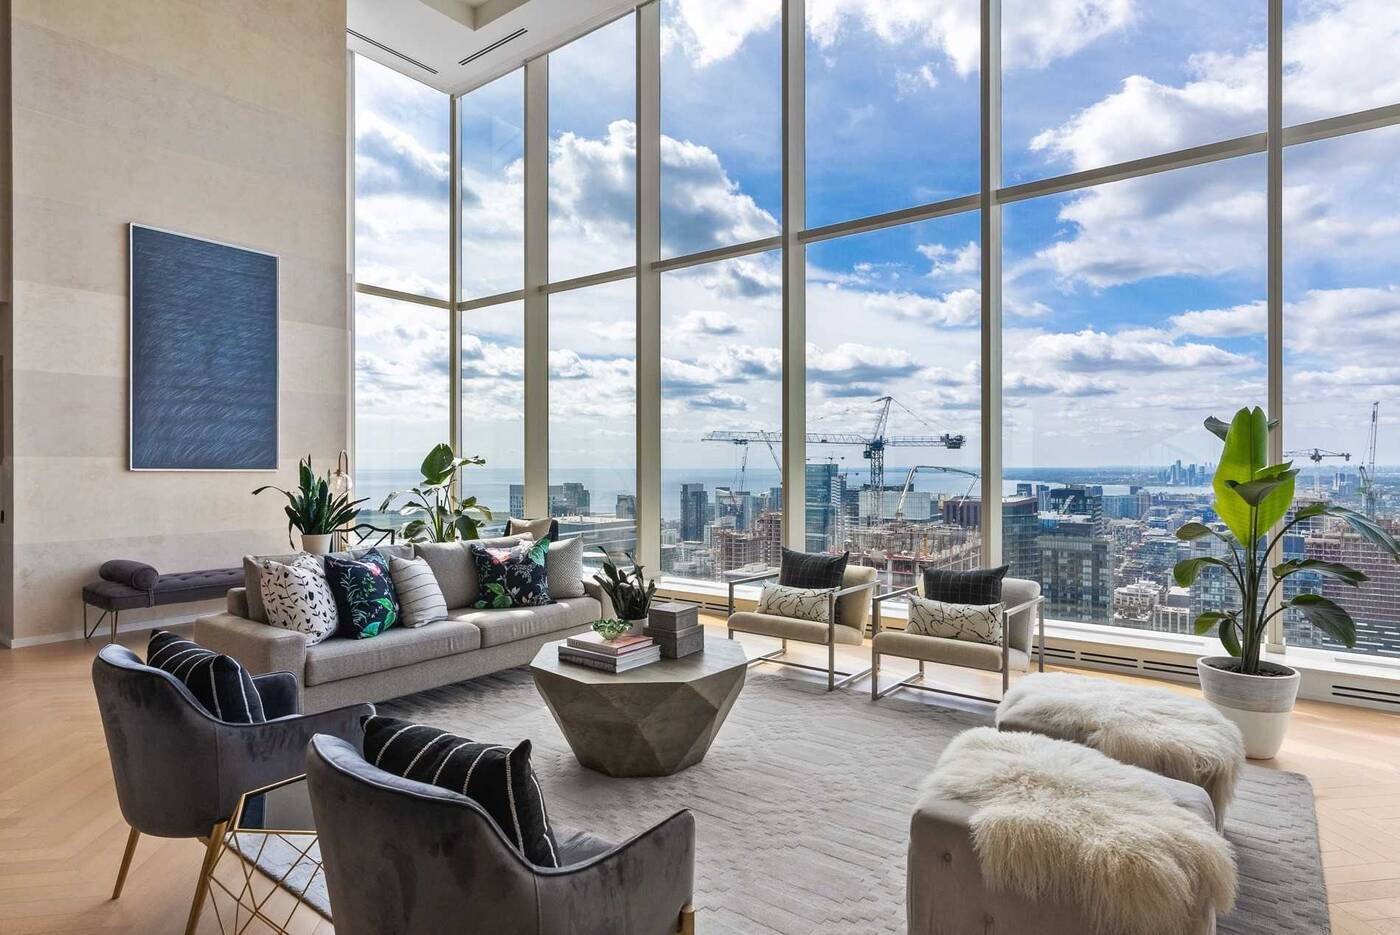 This $12 million Toronto condo above a 5-star hotel has never been lived in